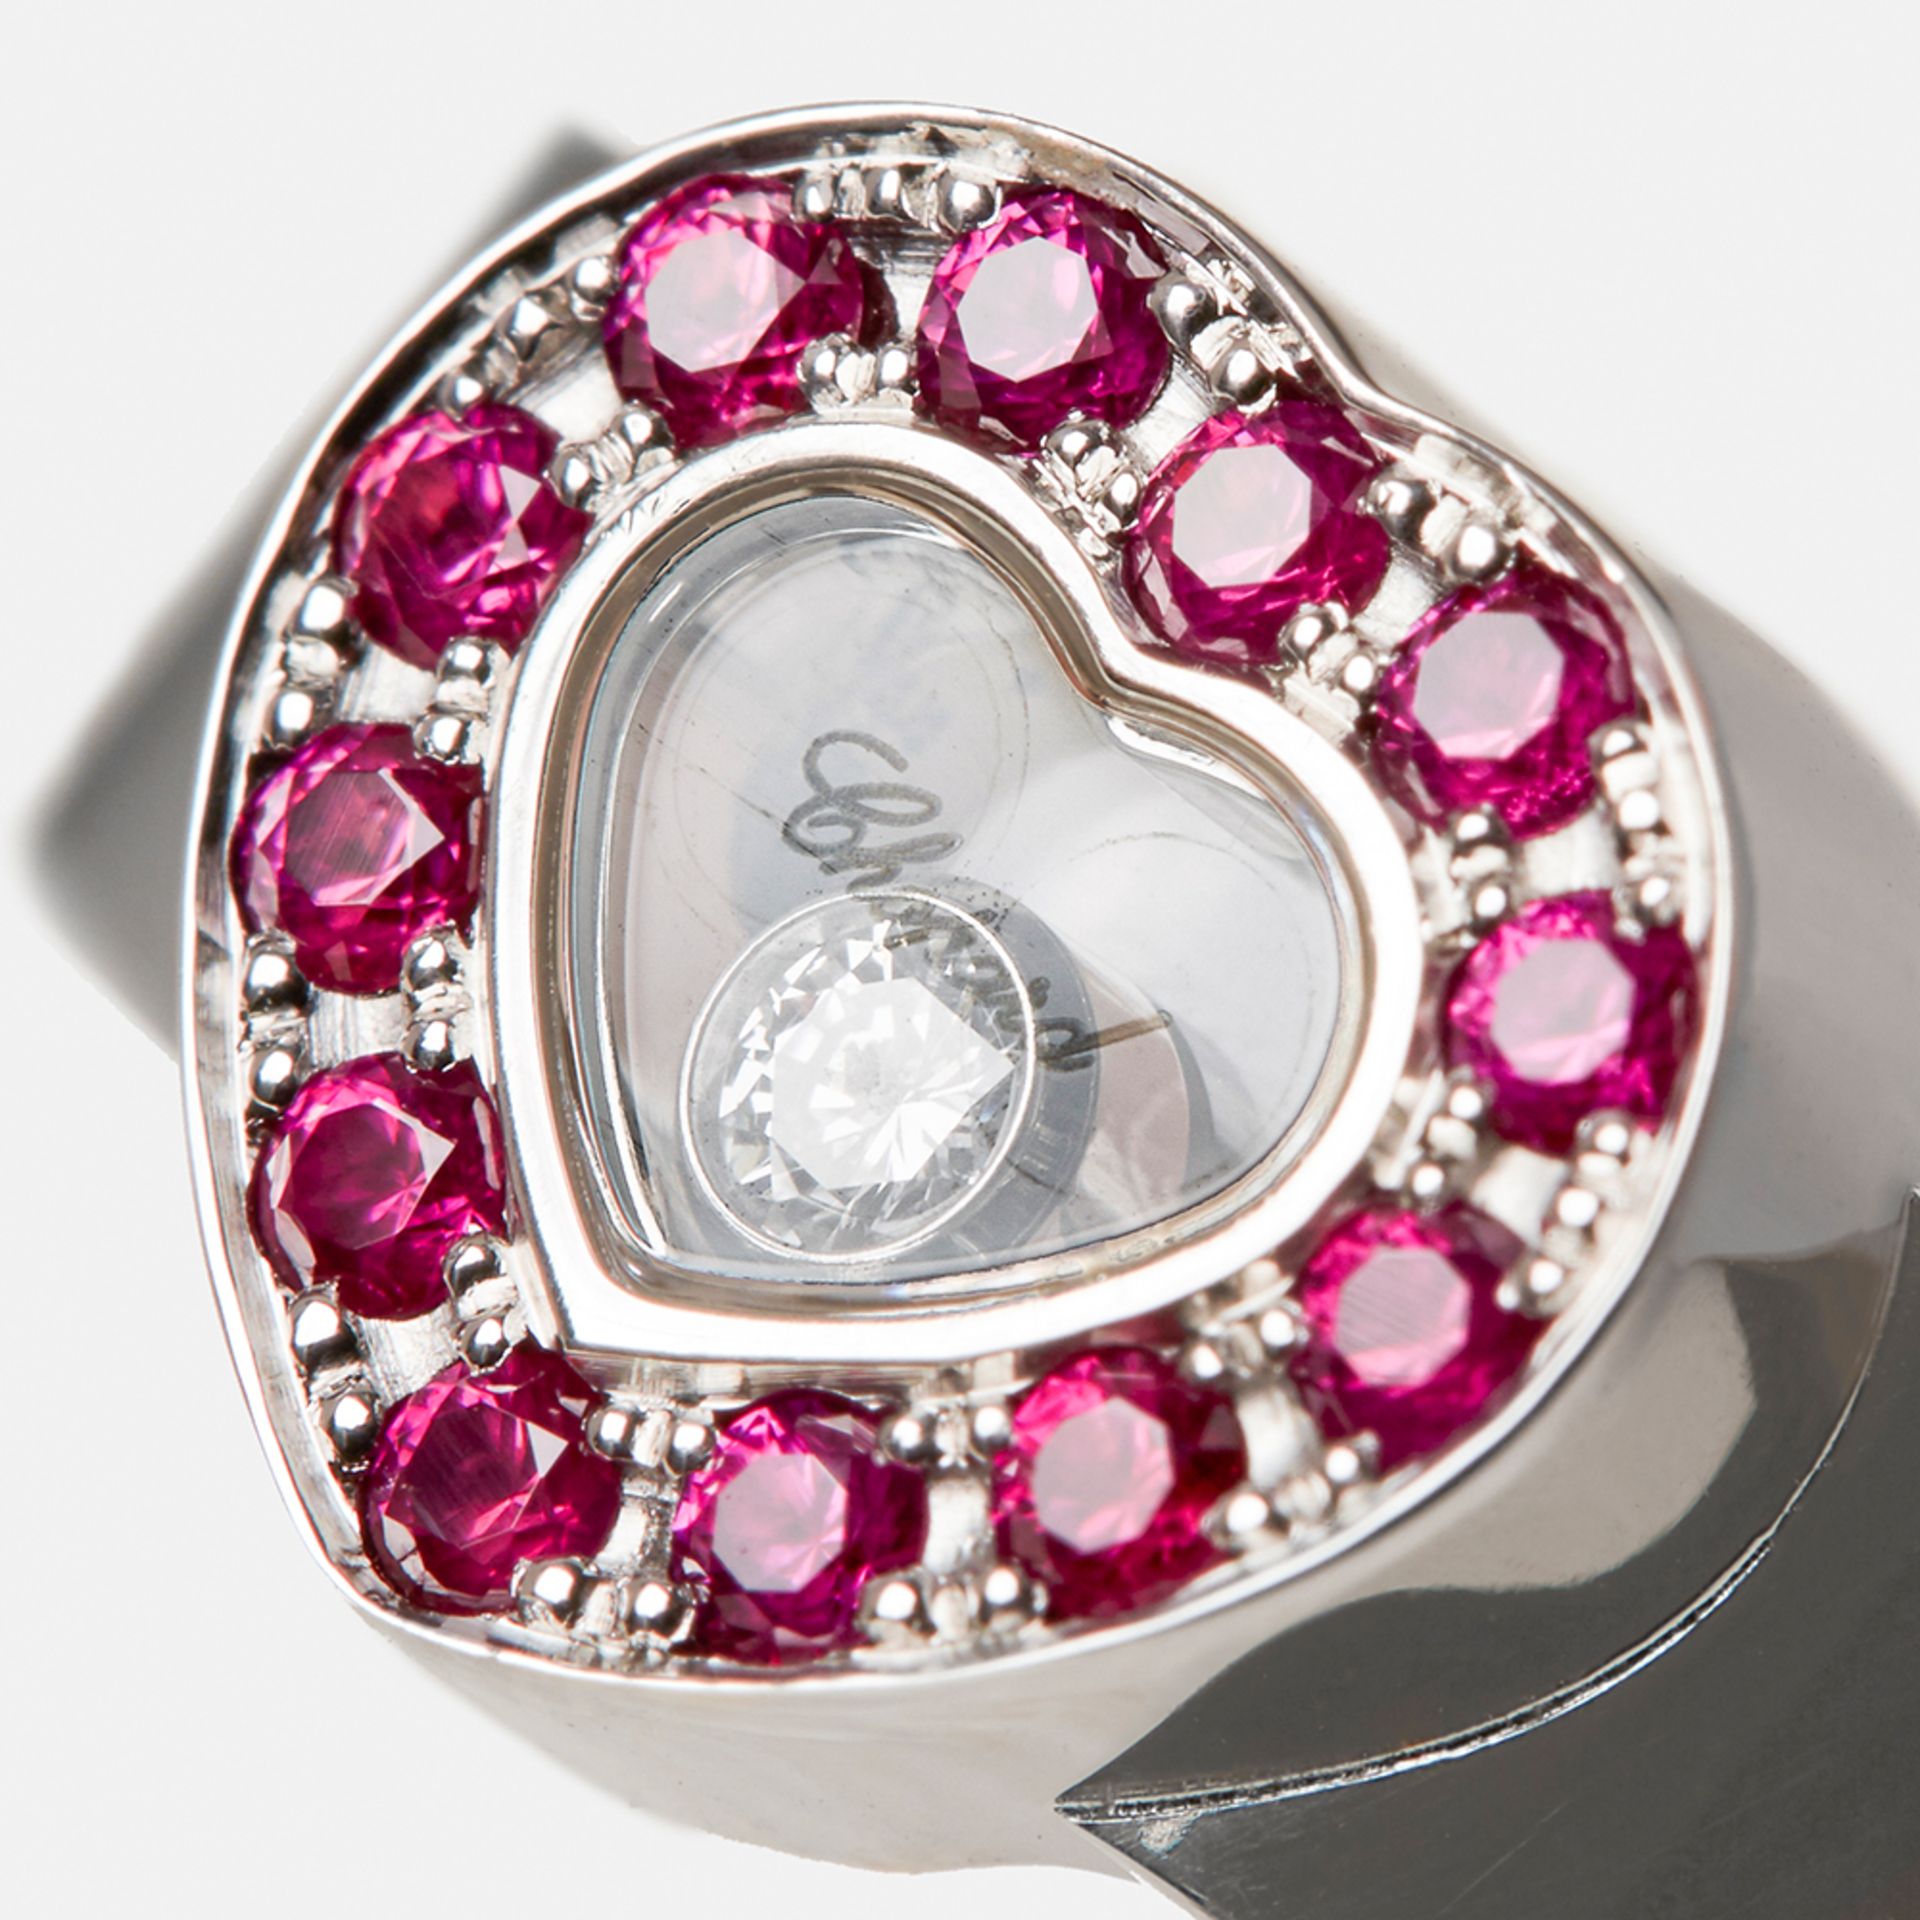 Chopard 18k White Gold Happy Diamonds Ruby Ring - Image 3 of 7